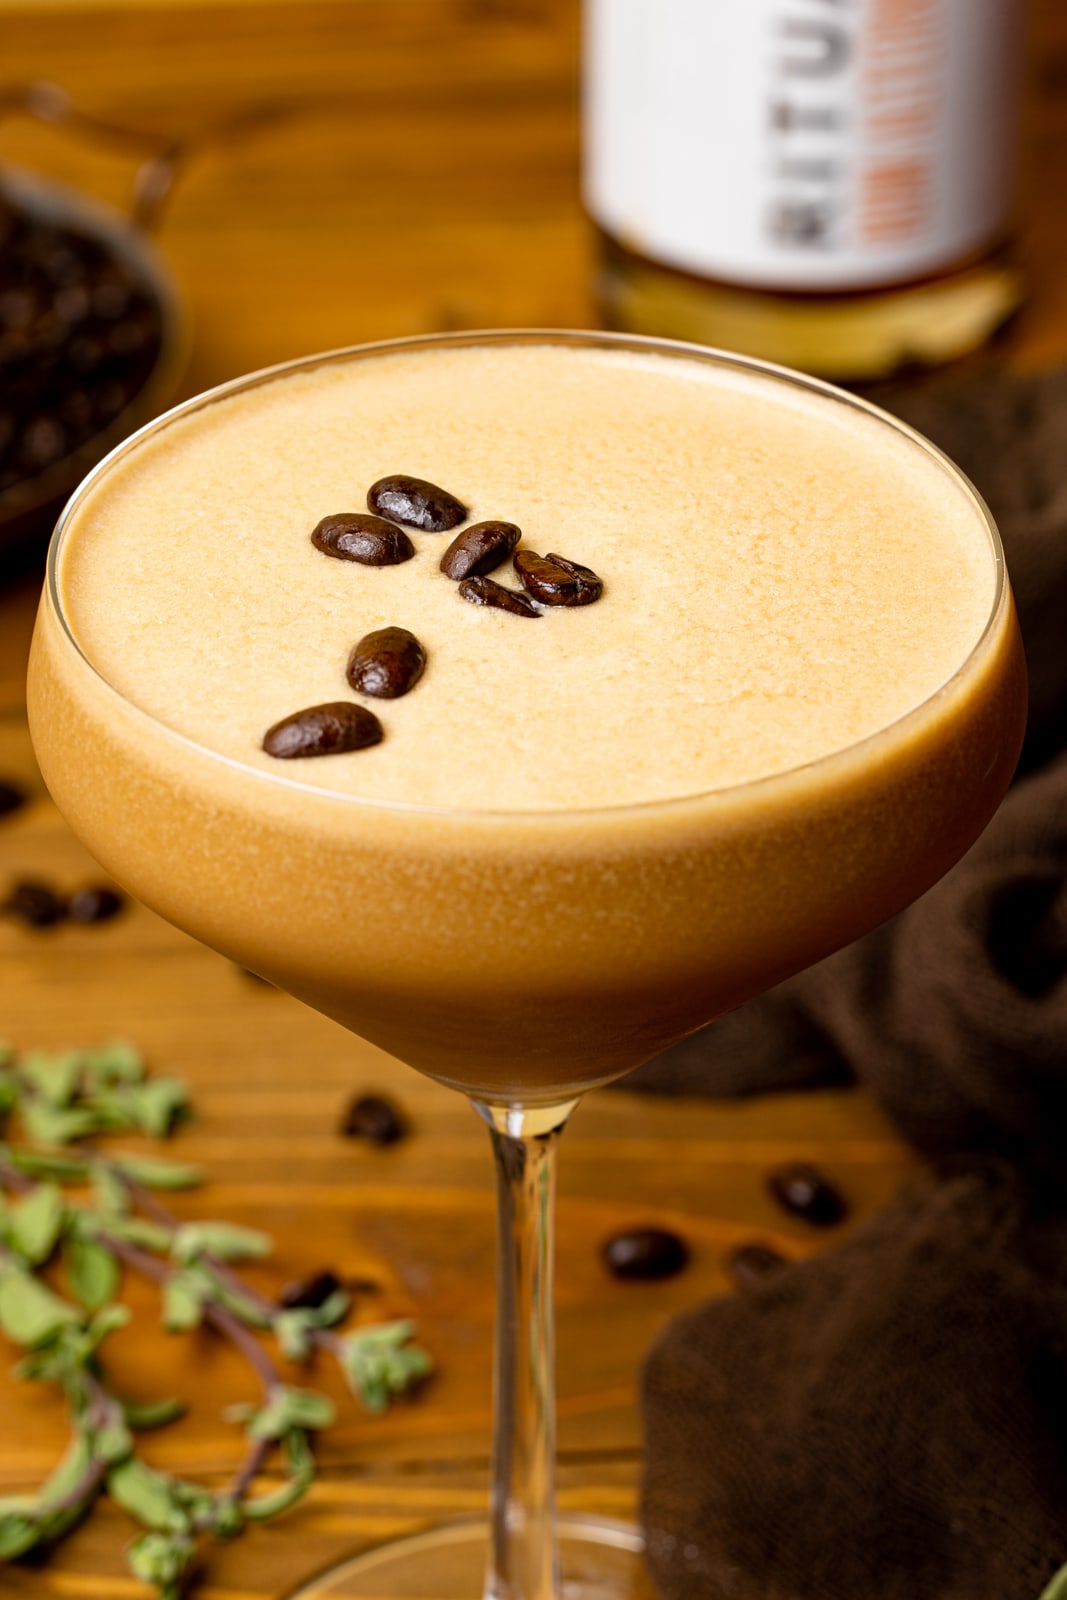 https://www.orchidsandsweettea.com/wp-content/uploads/2022/02/Dairy-Free-Espresso-Martini-with-No-Kahlua.jpg